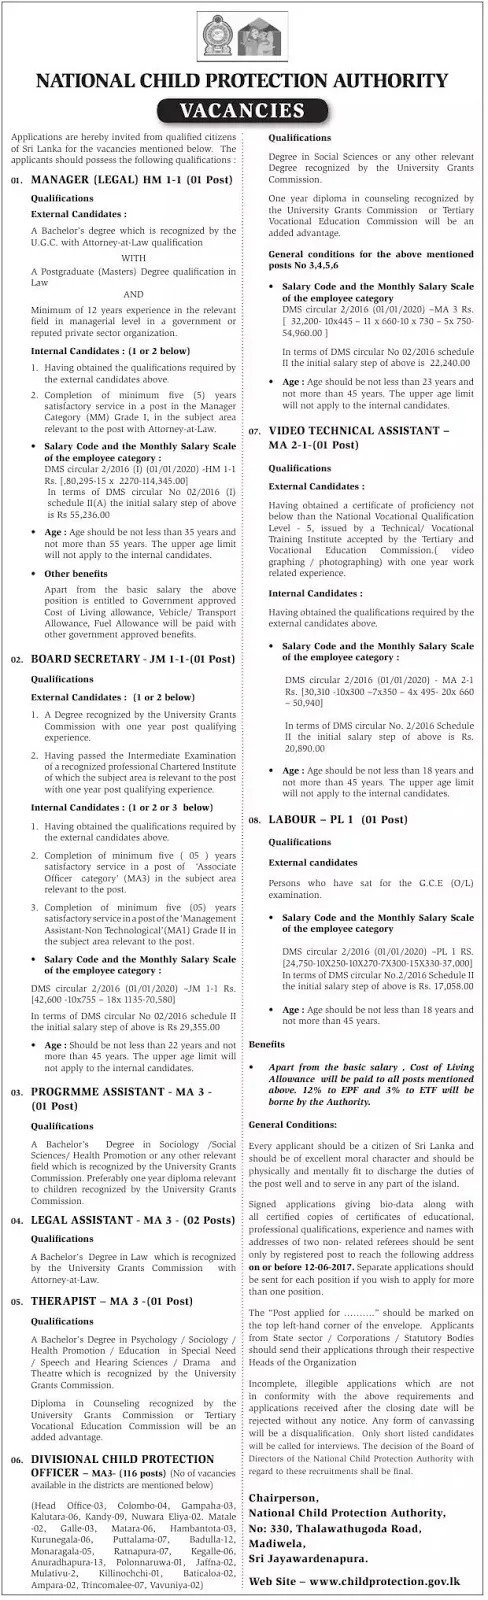 National Child Protection Authority Vacancies